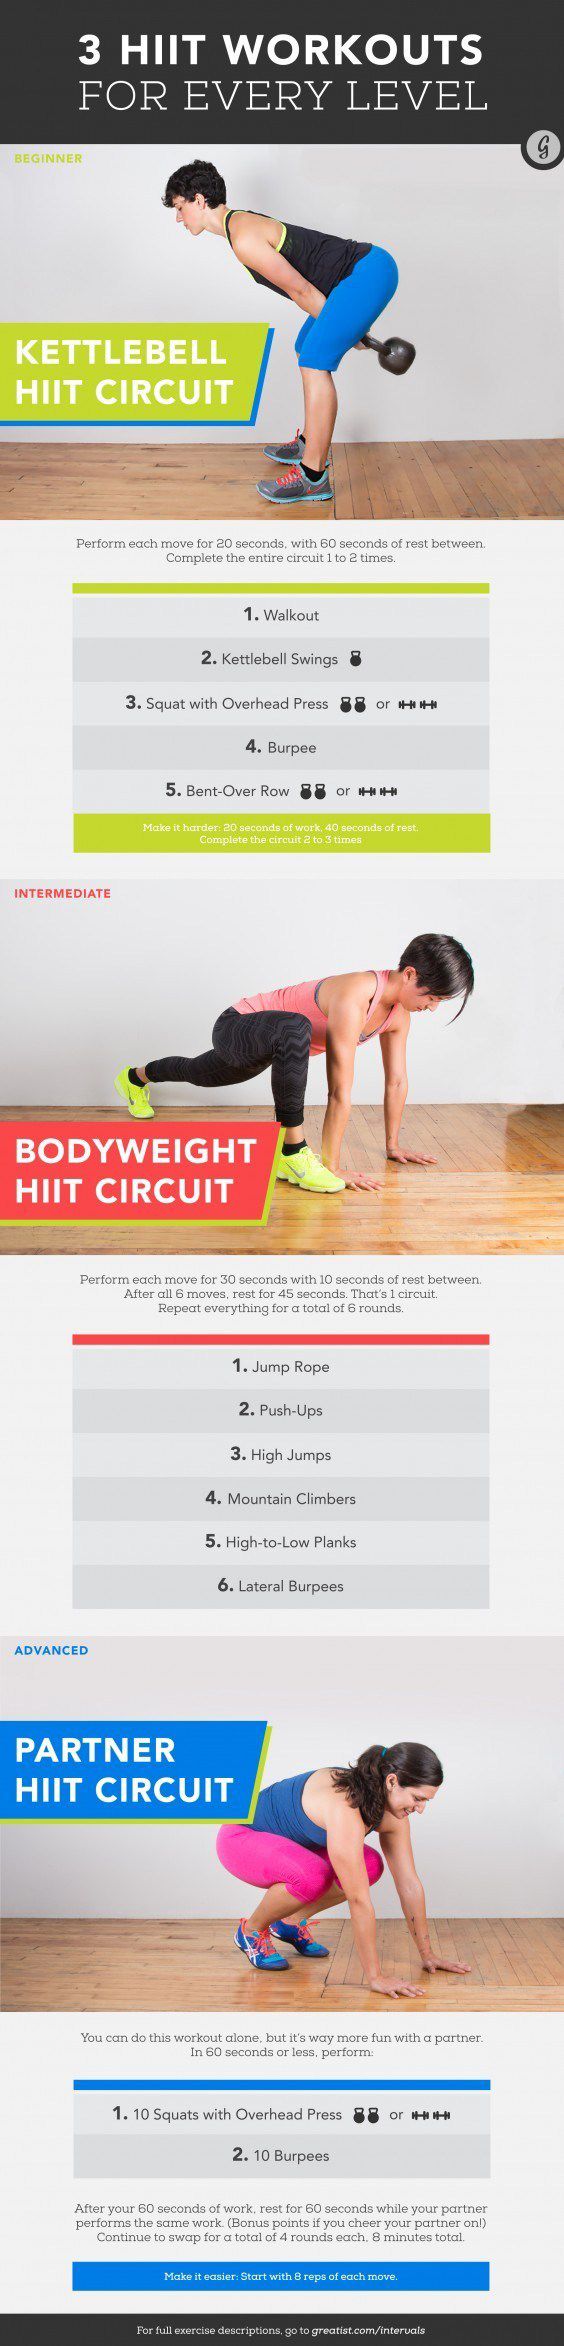 Interval Training: 3 Interval Training Workouts and HIIT Exercises